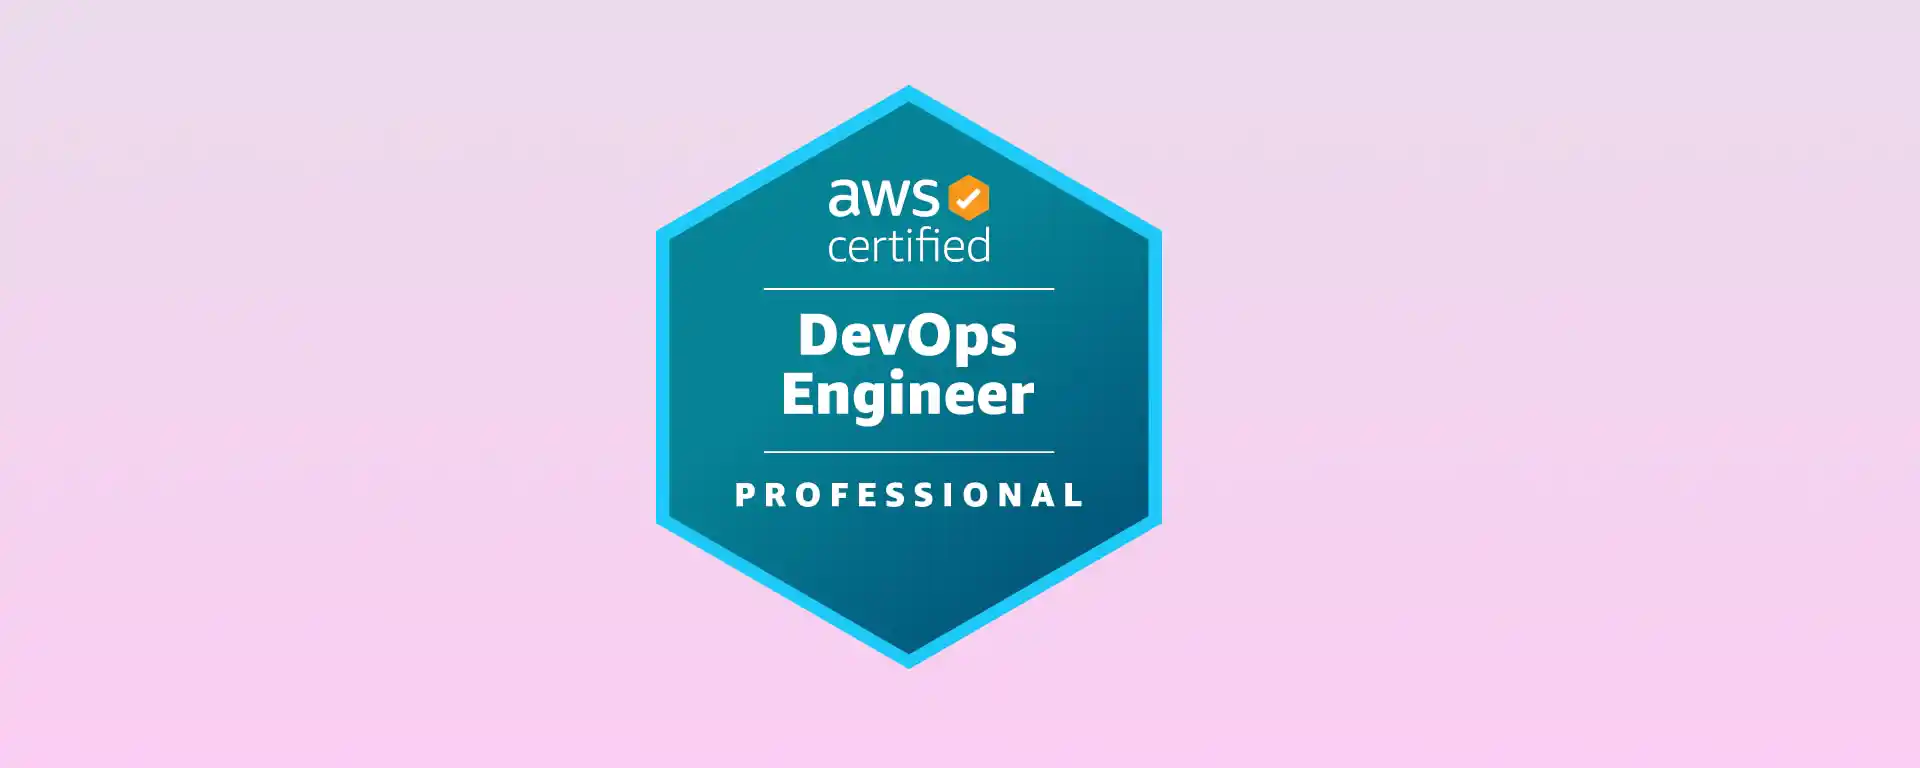 How to pass the AWS DevOps Engineer Professional exam guide (2022)